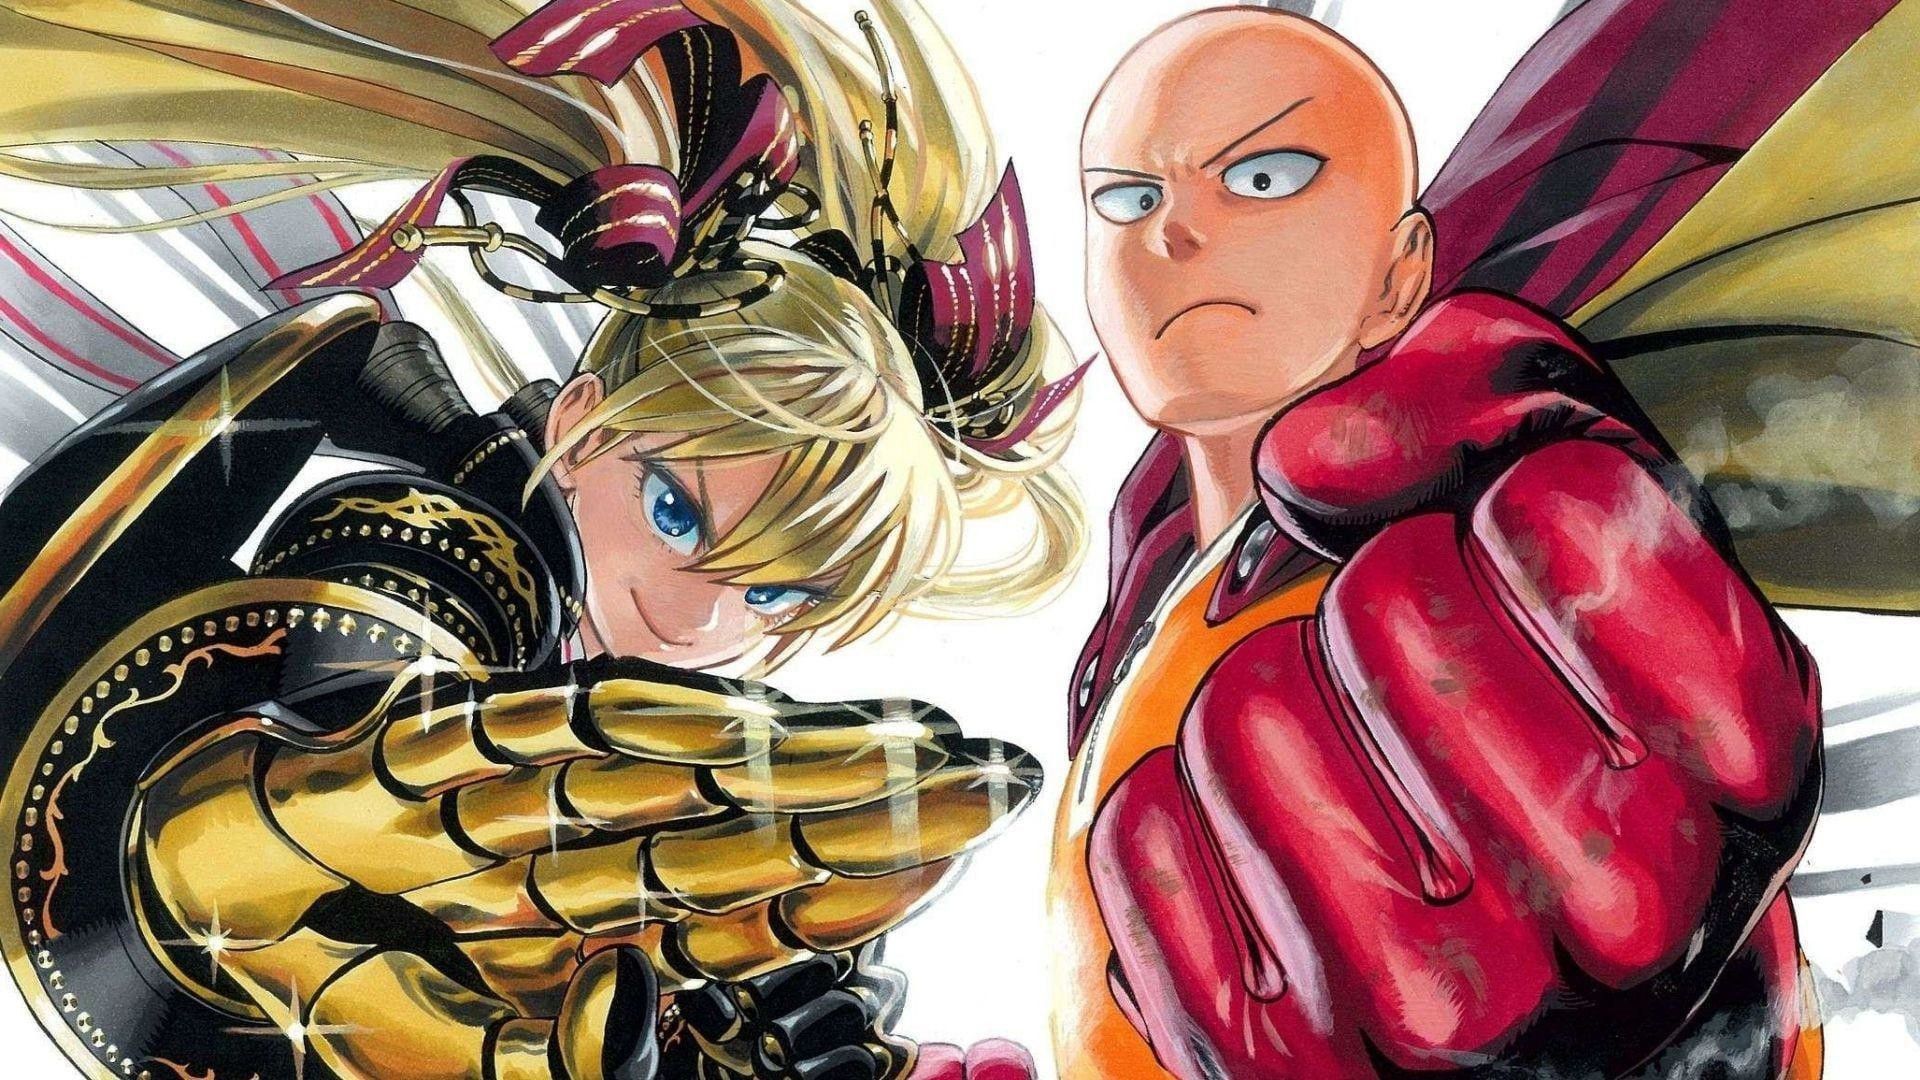 One Punch Man HD Wallpapers Free Download PC Laptop